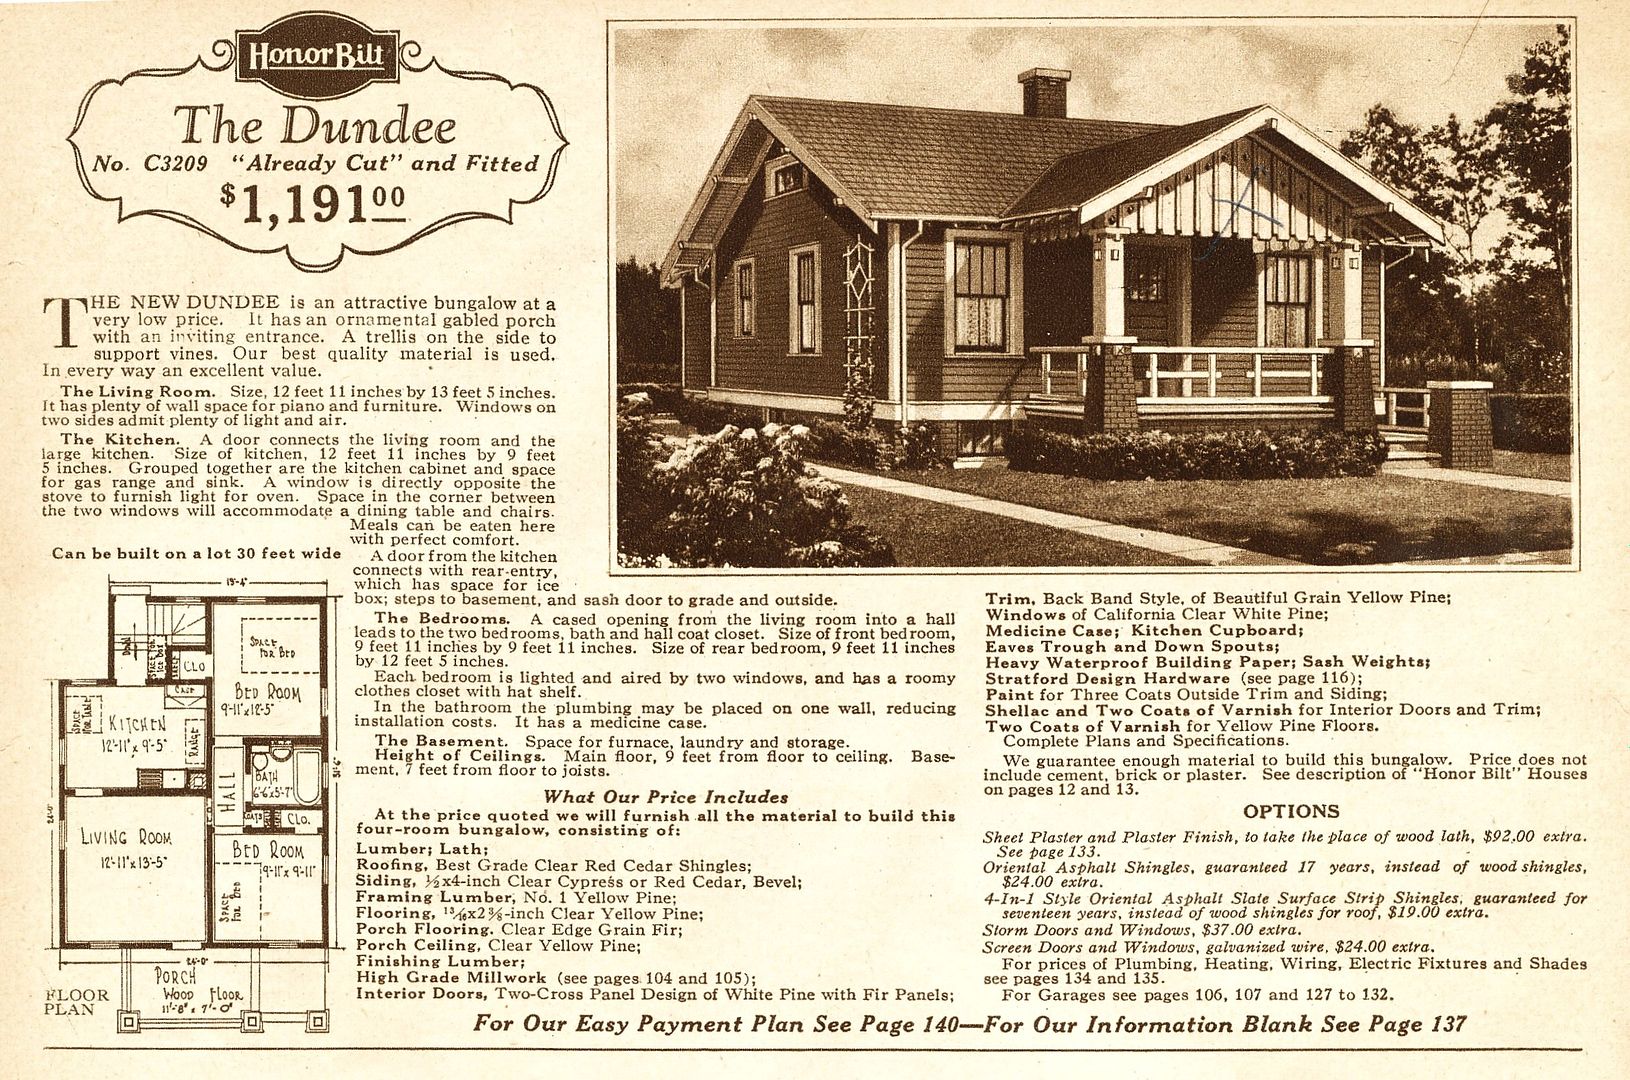 By 1928, the house had undergone some changes. 